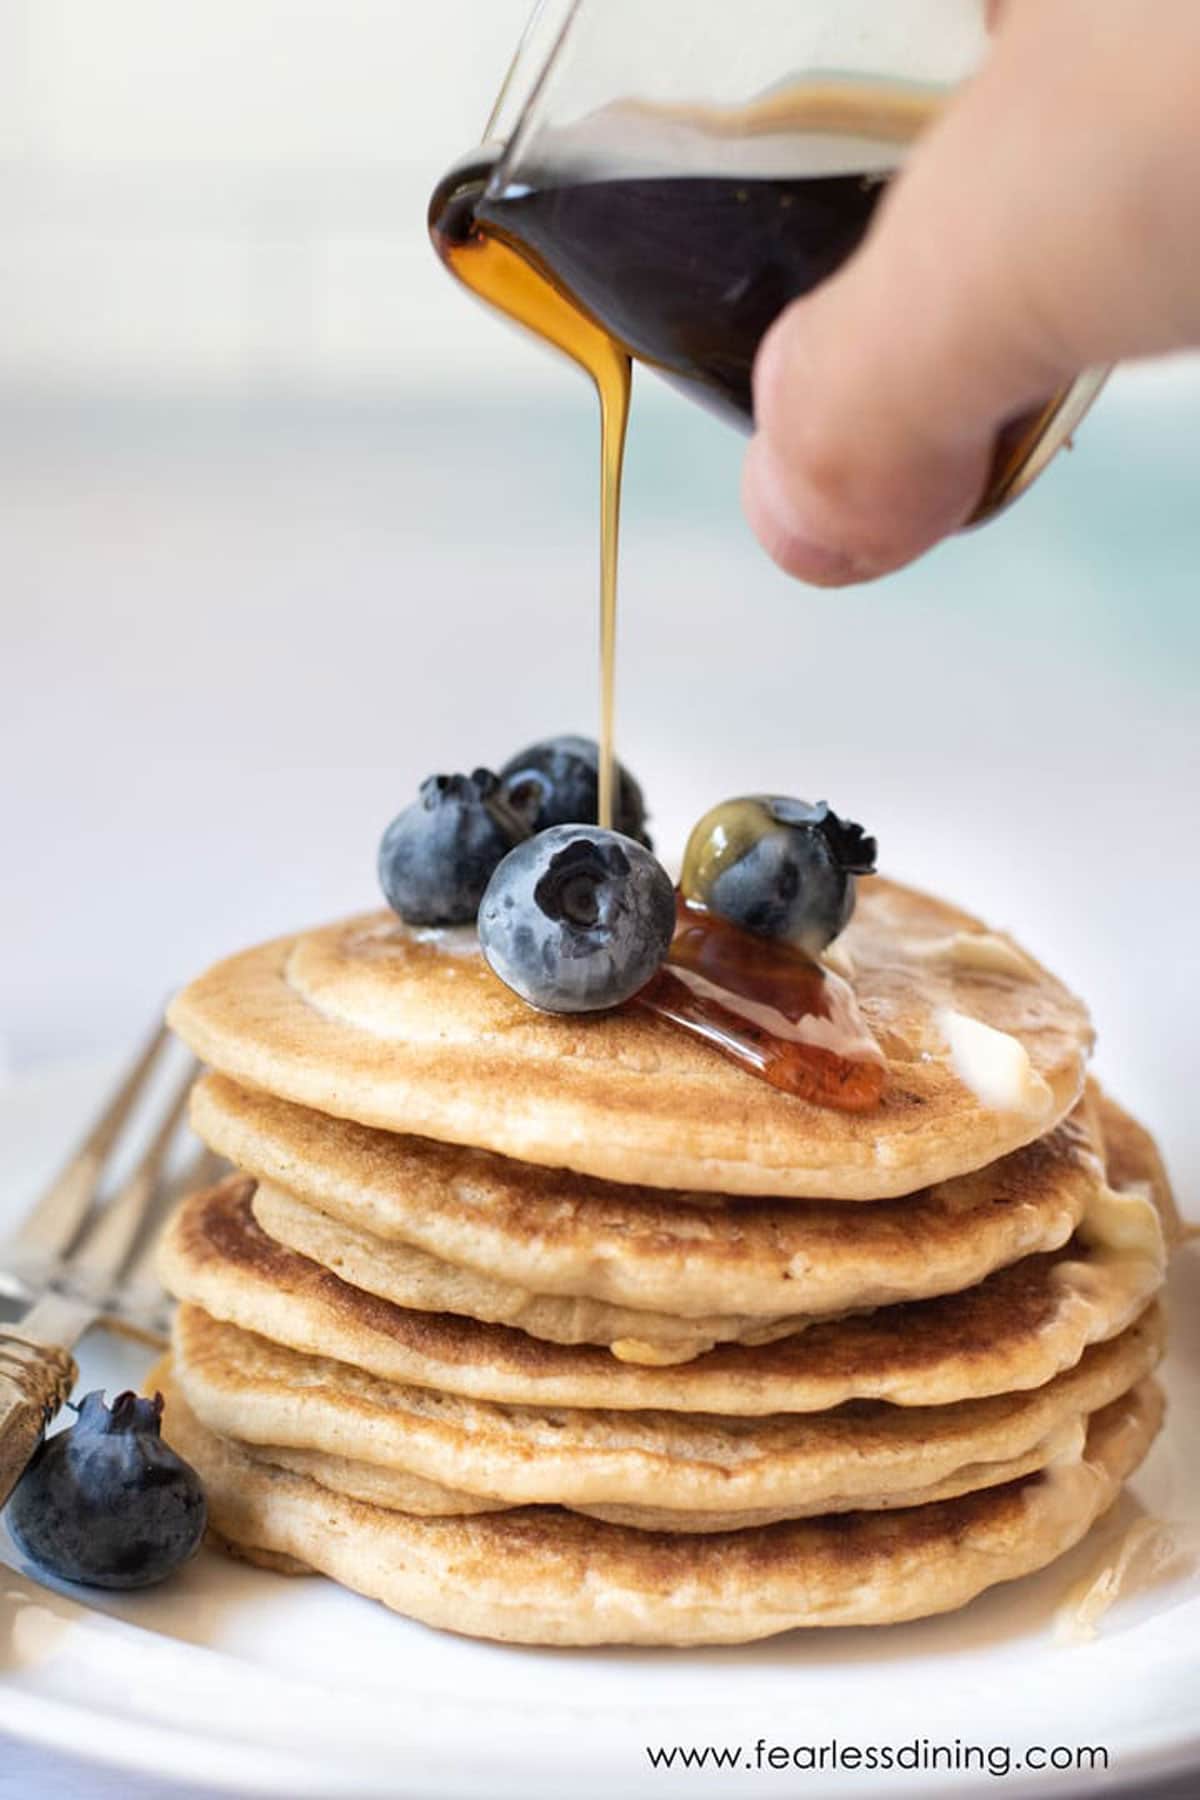 Pouring syrup over a stack of gluten free pancakes.